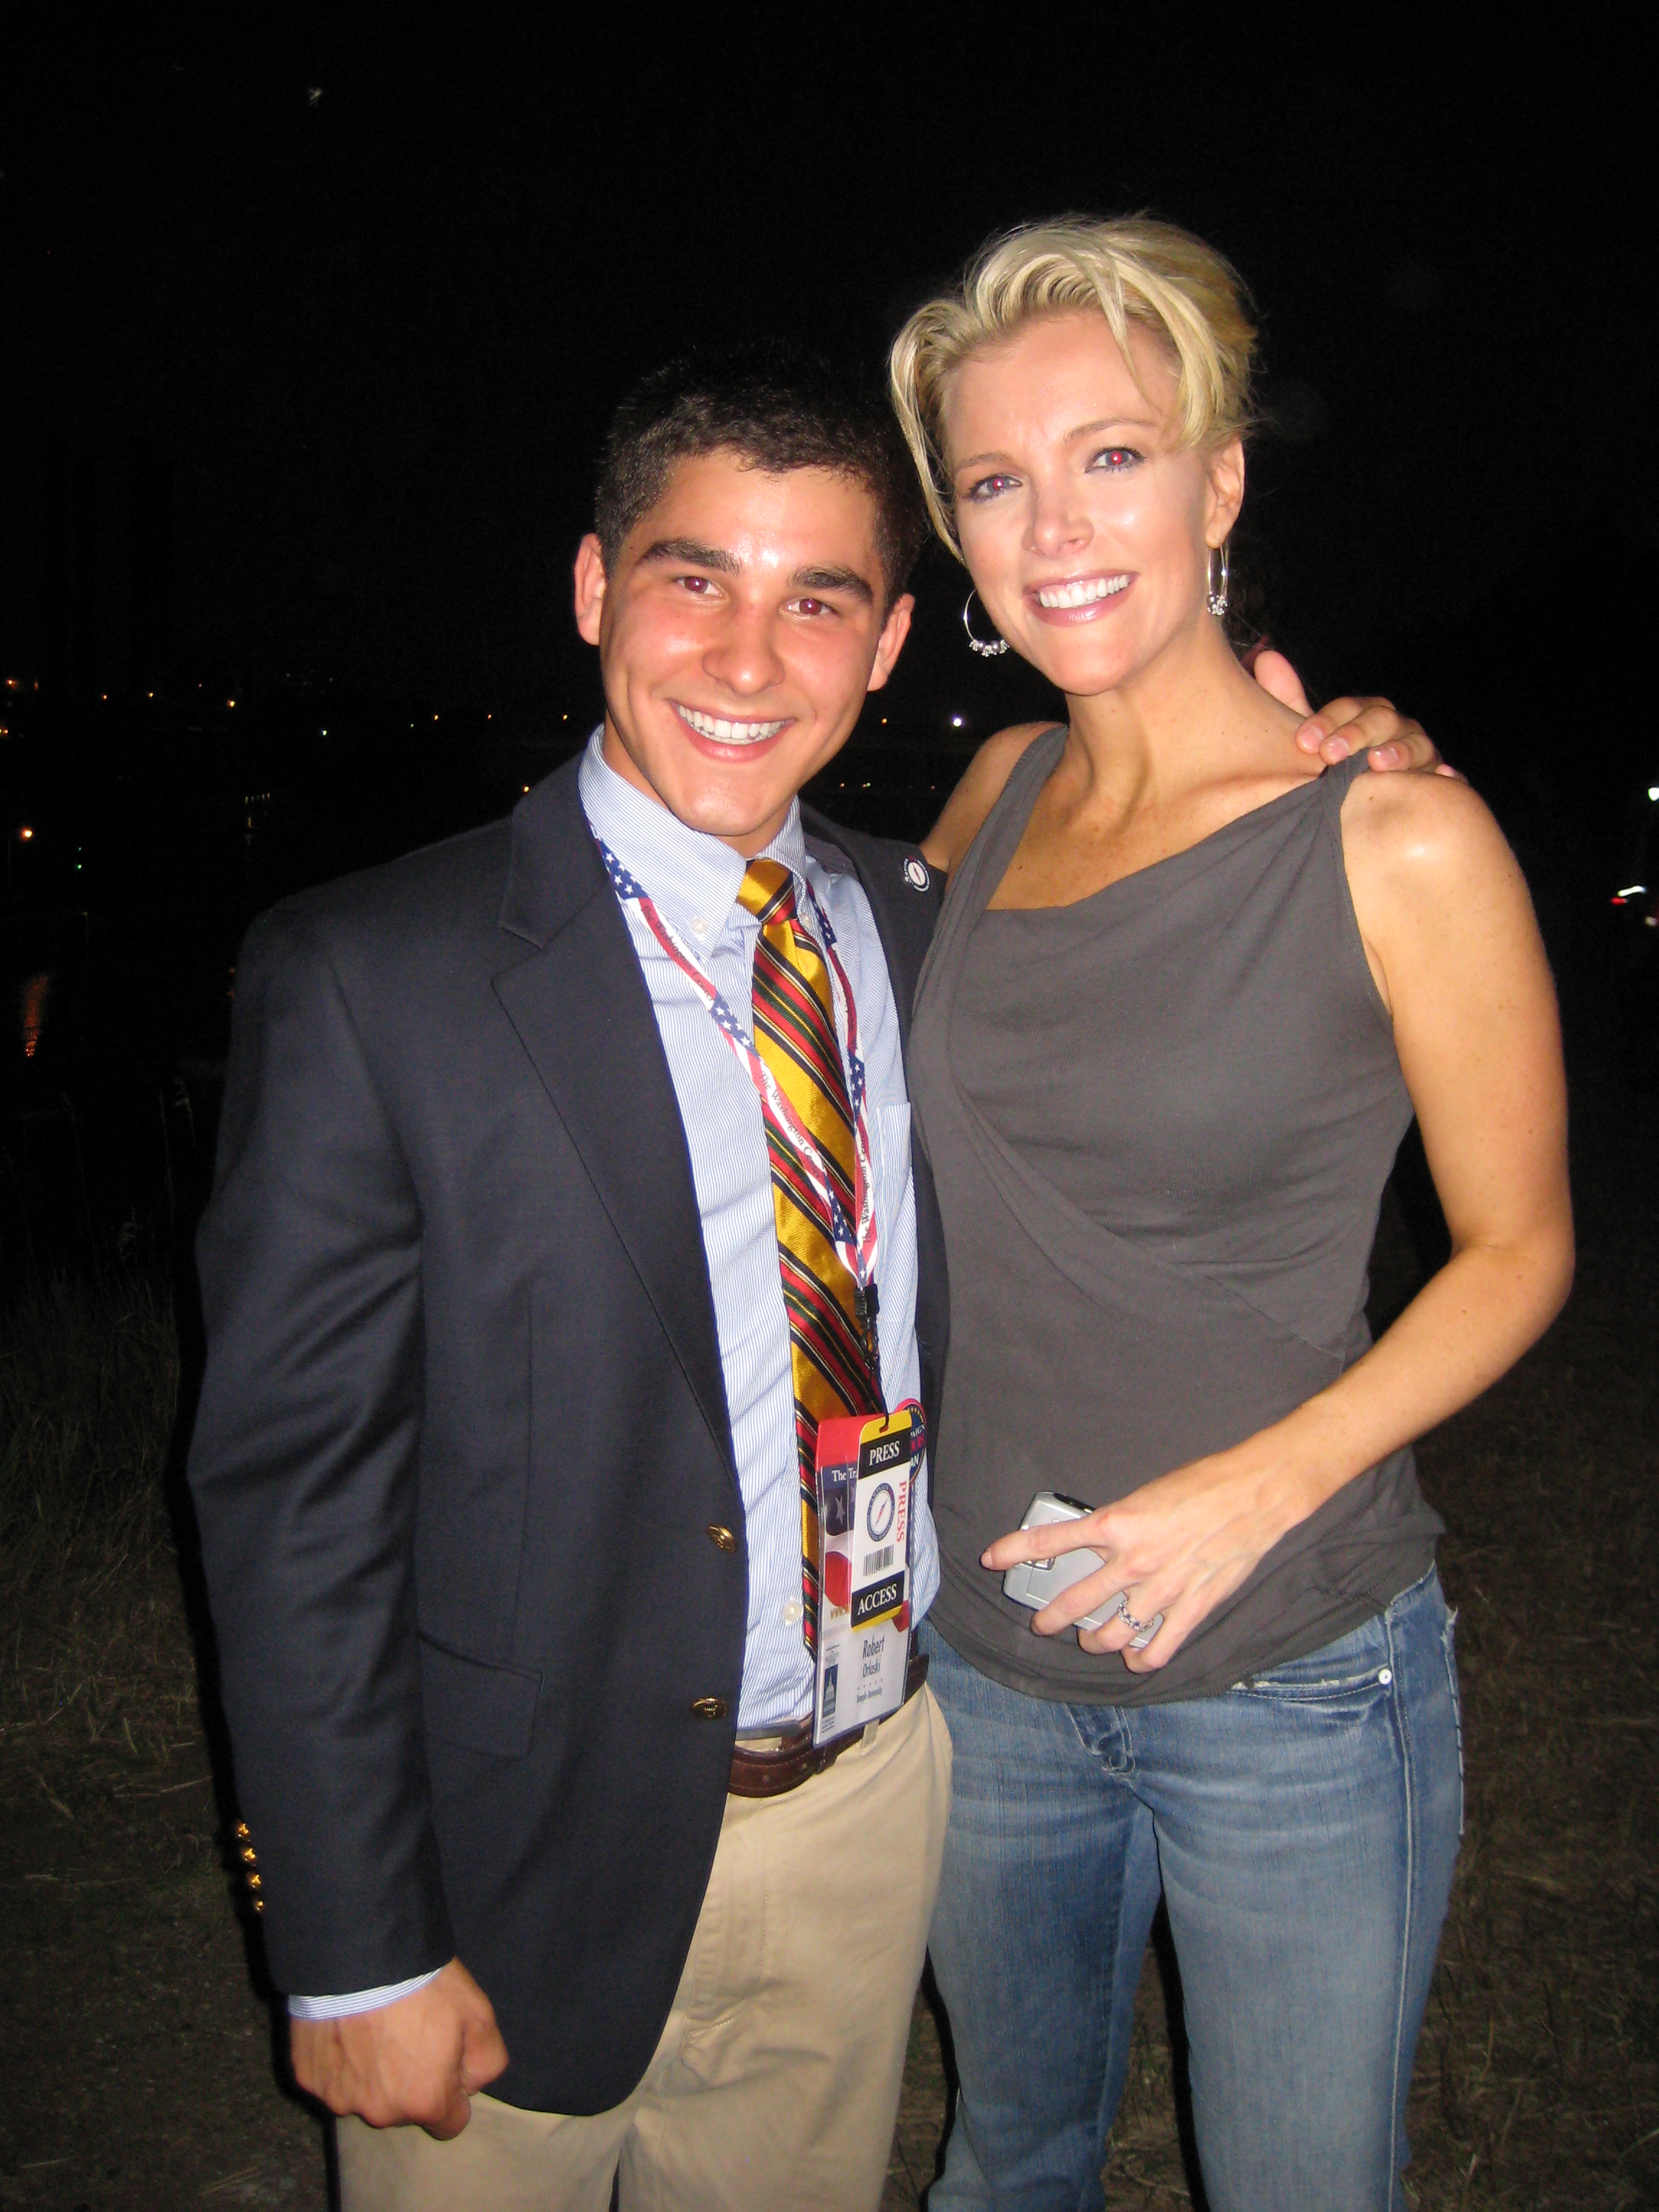 Me with MEGYN KELLY